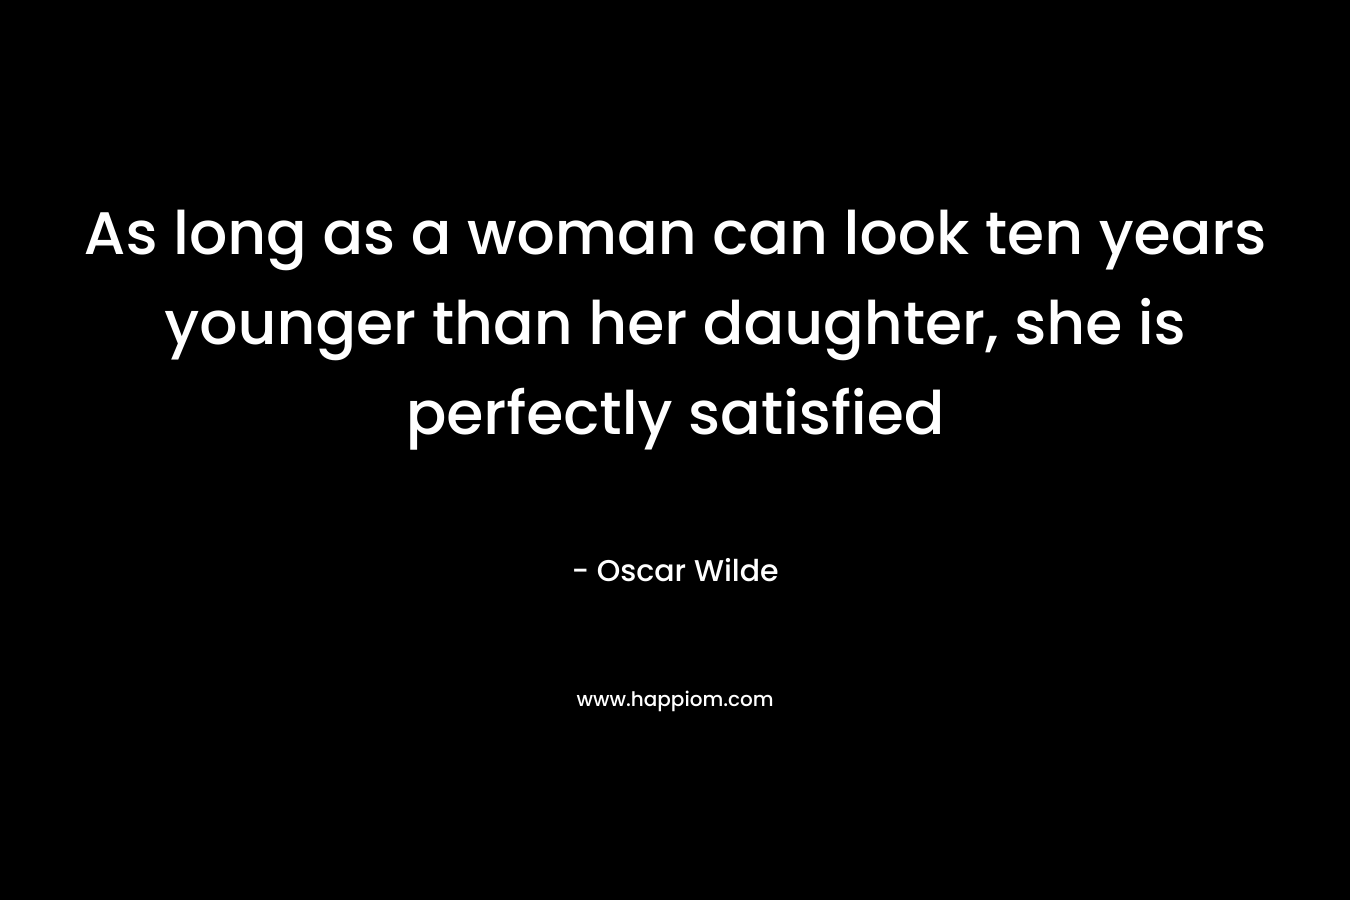 As long as a woman can look ten years younger than her daughter, she is perfectly satisfied